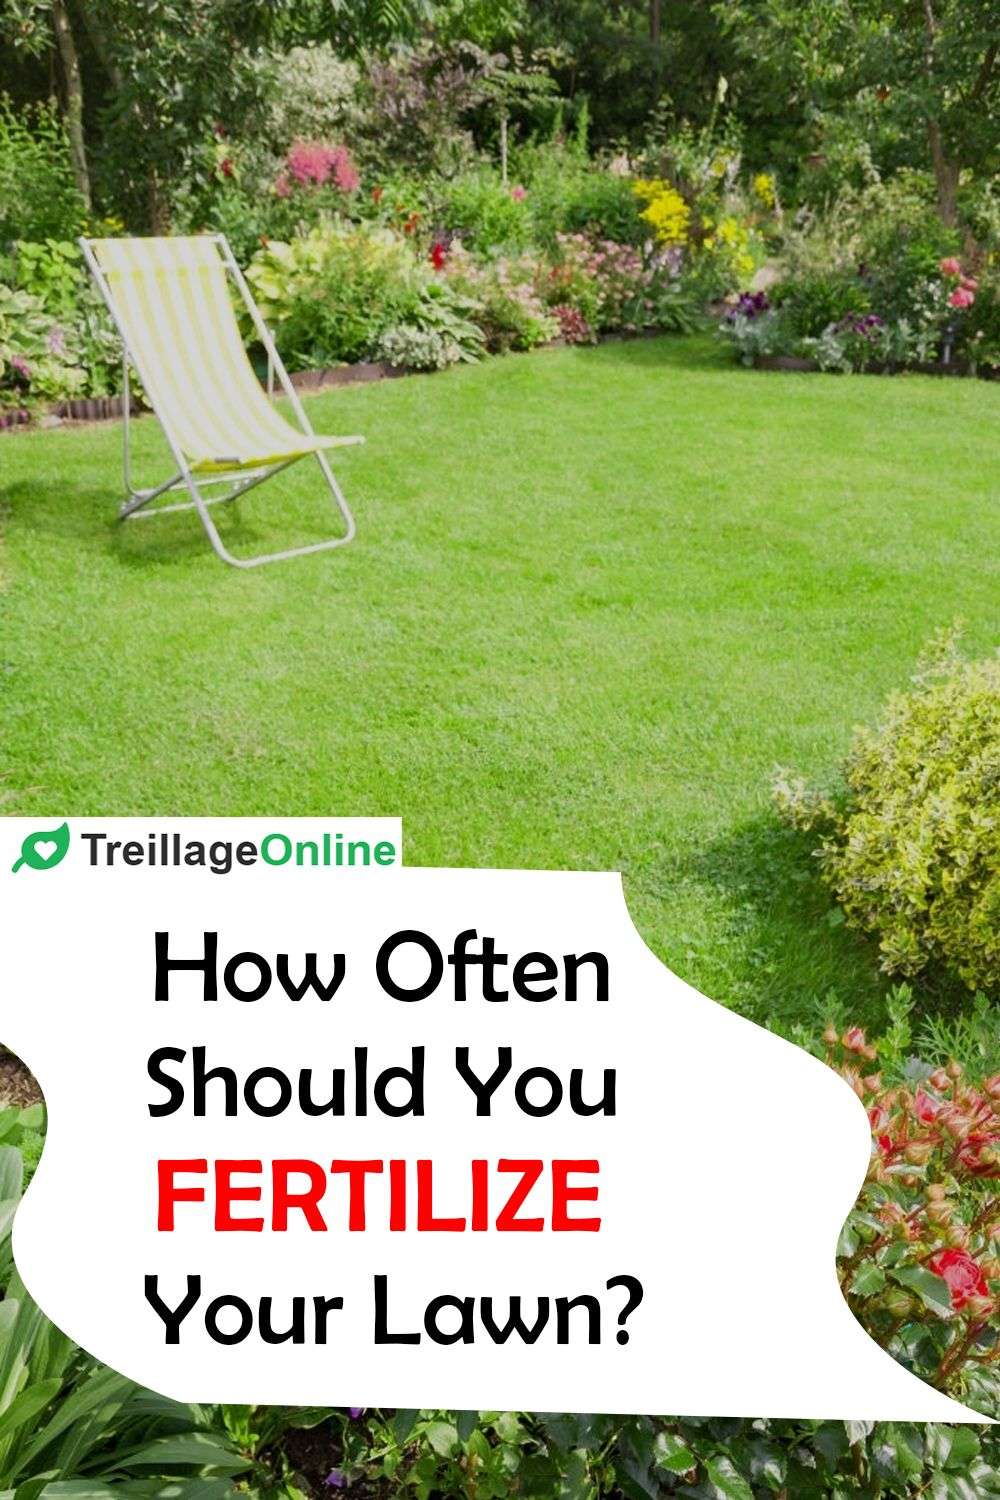 How Often Should You Fertilize Your Lawn? in 2020